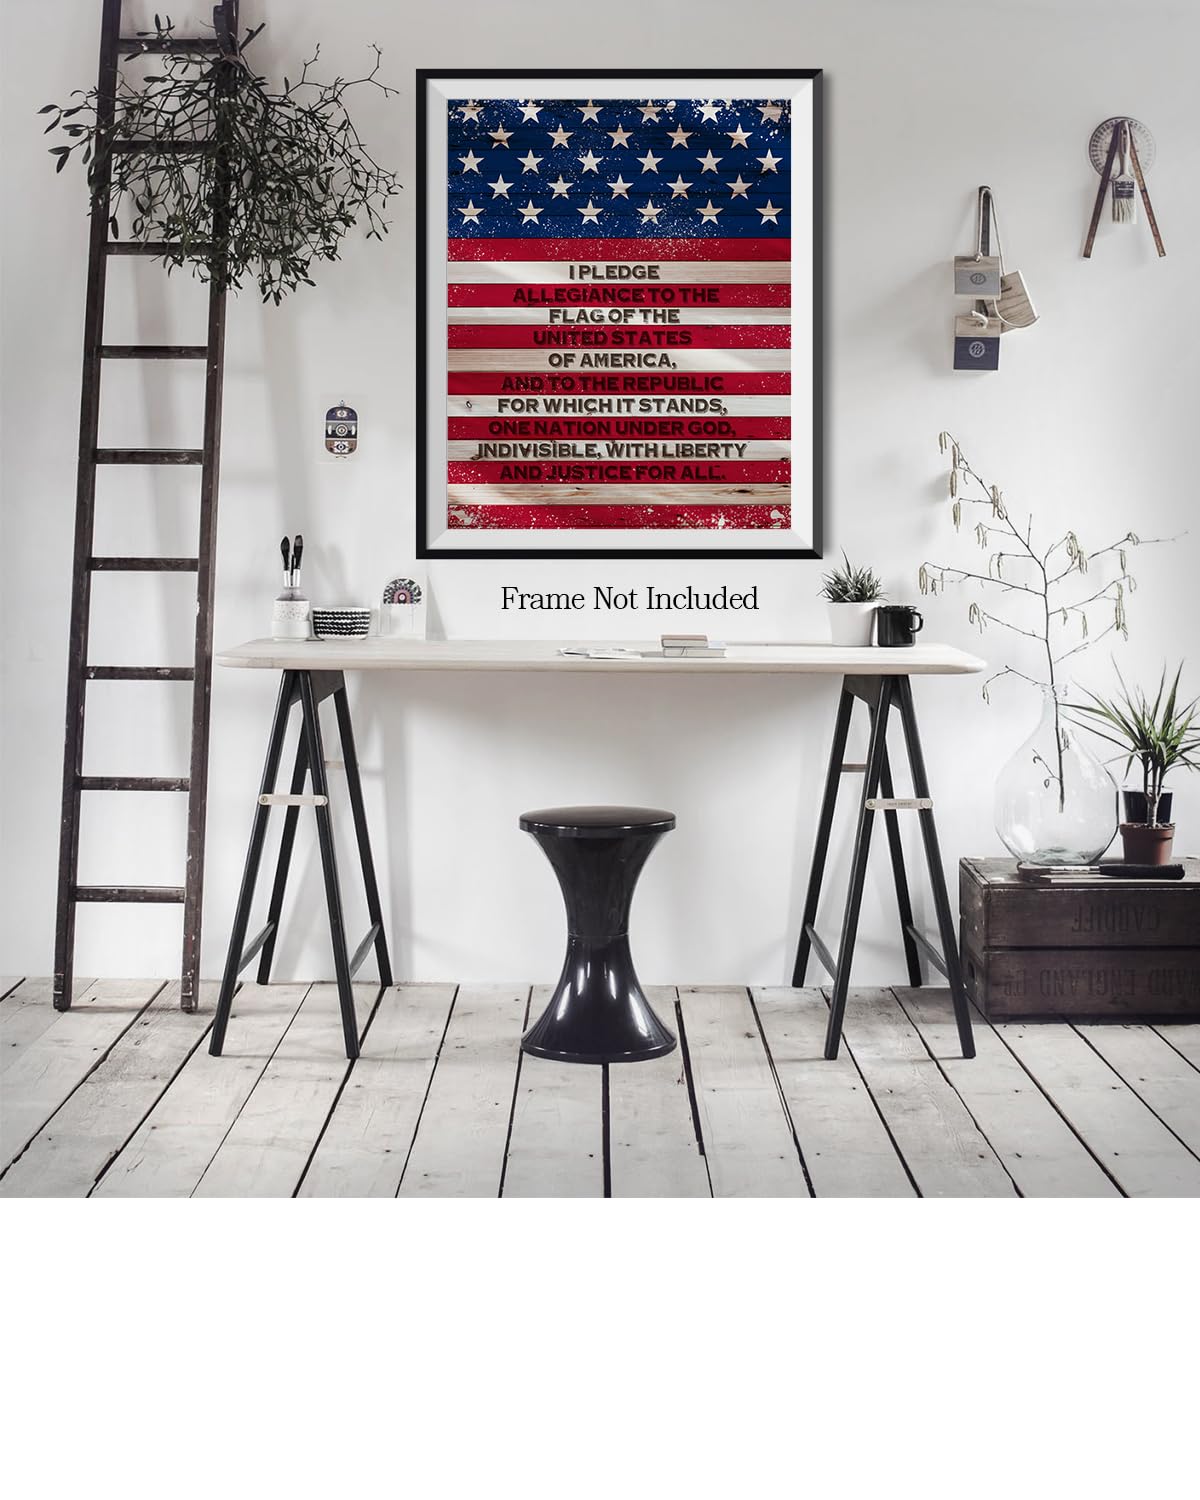 Pledge of Allegiance American Flag Wall Art - Patriotic Wall Decor - Memorial Day, 4th of July Canvas - Gift for Americana, US History Buffs, Military Veterans, Patriots